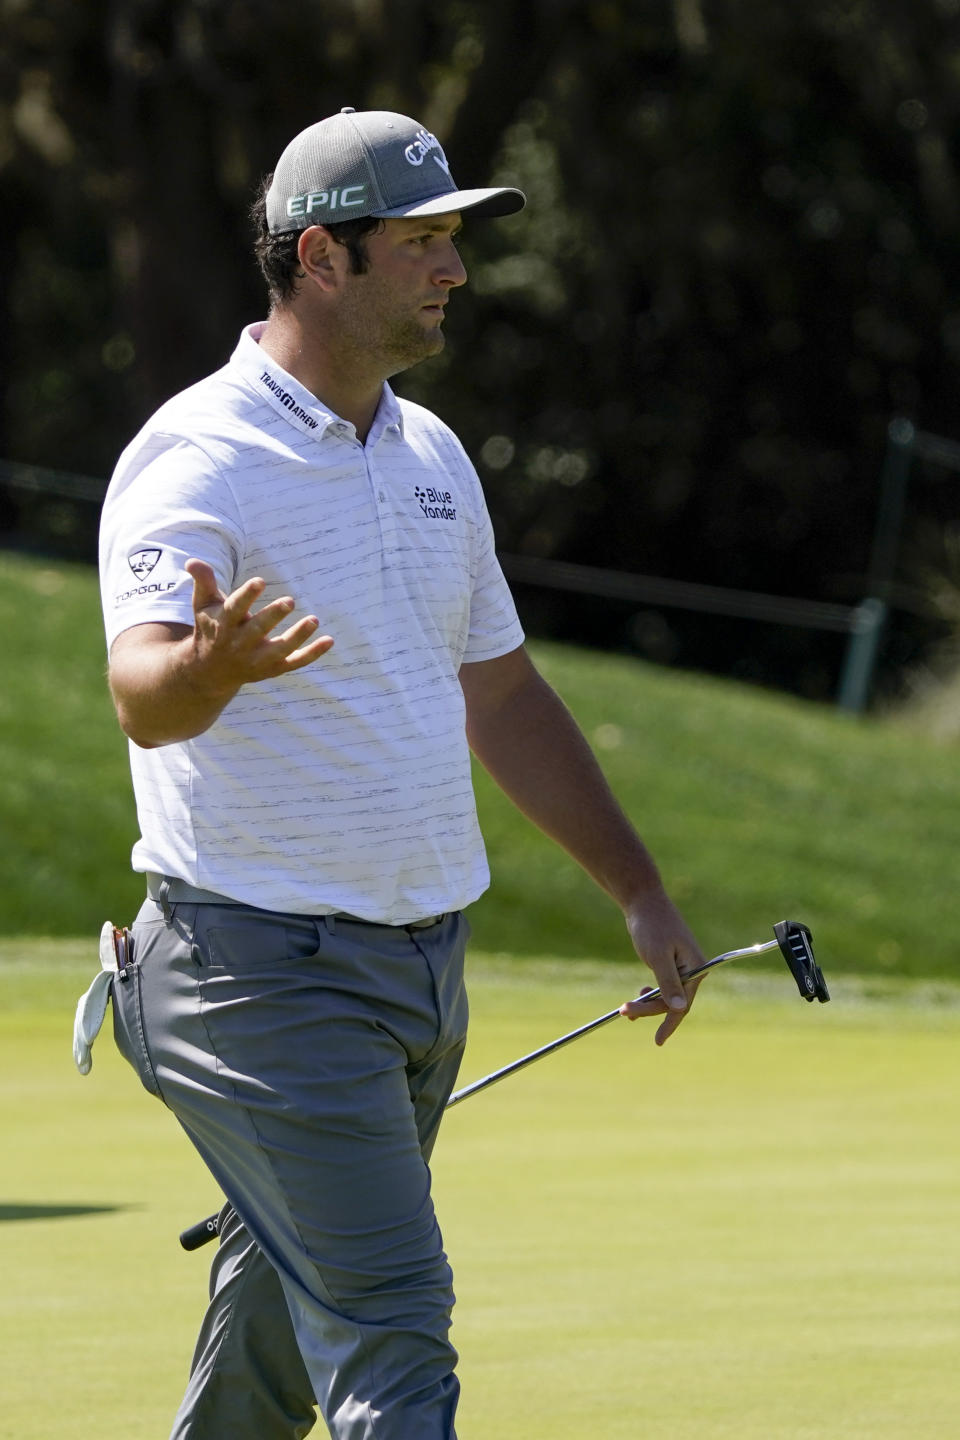 Jon Rahm, of Spain, reacts after missing a putt on the second hole during the third round of The Players Championship golf tournament Saturday, March 13, 2021, in Ponte Vedra Beach, Fla. (AP Photo/John Raoux)